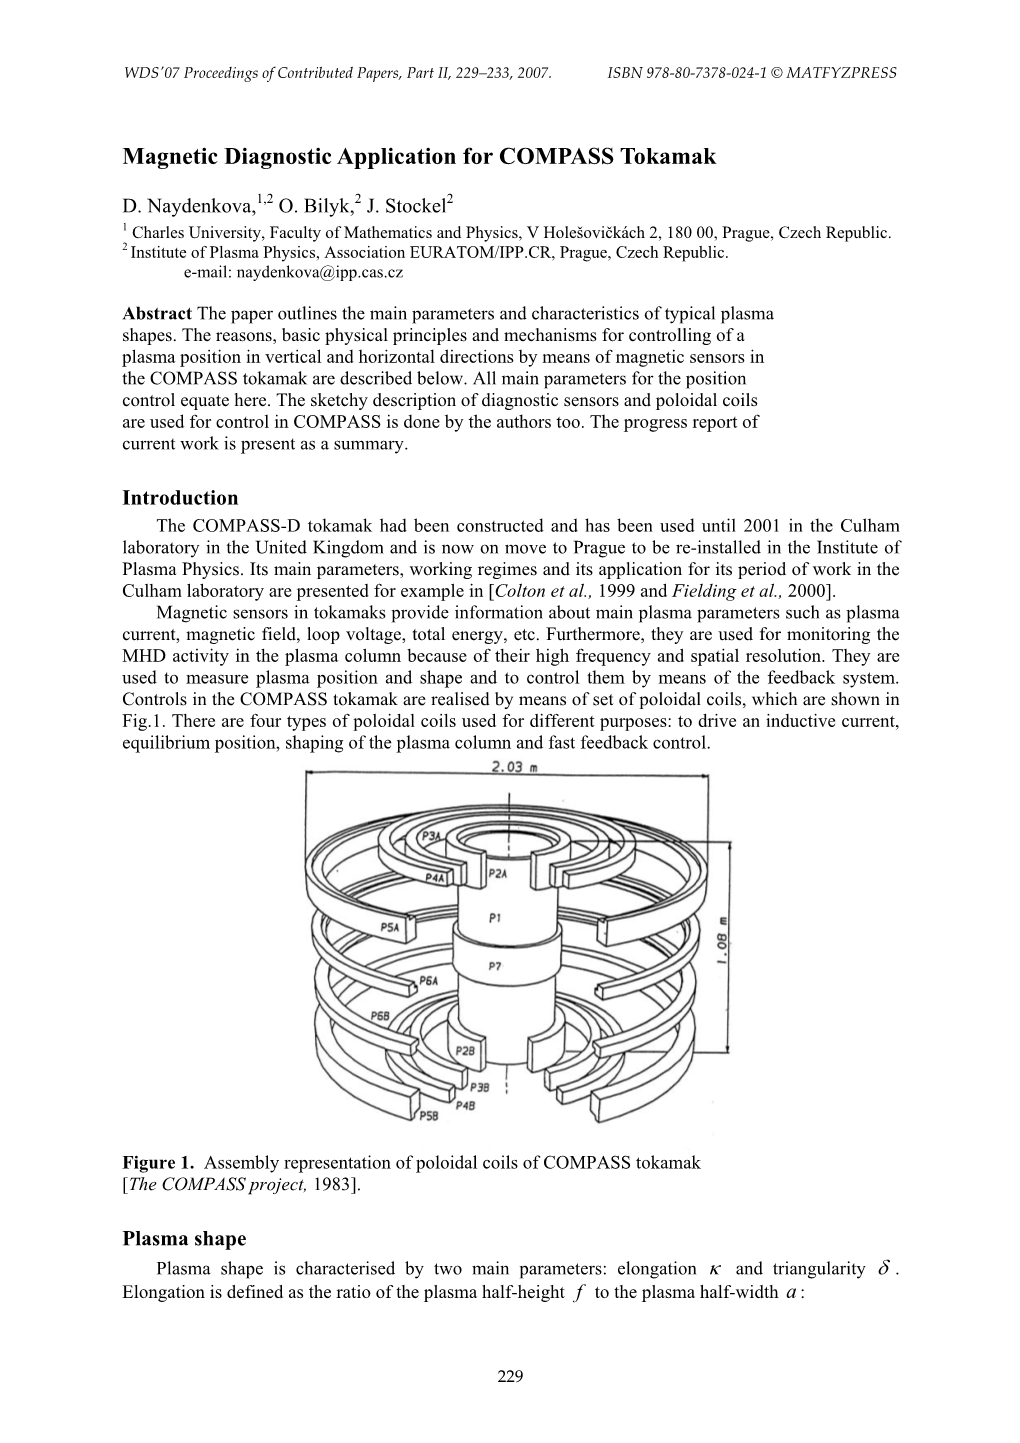 Magnetic Diagnostic Application for COMPASS Tokamak